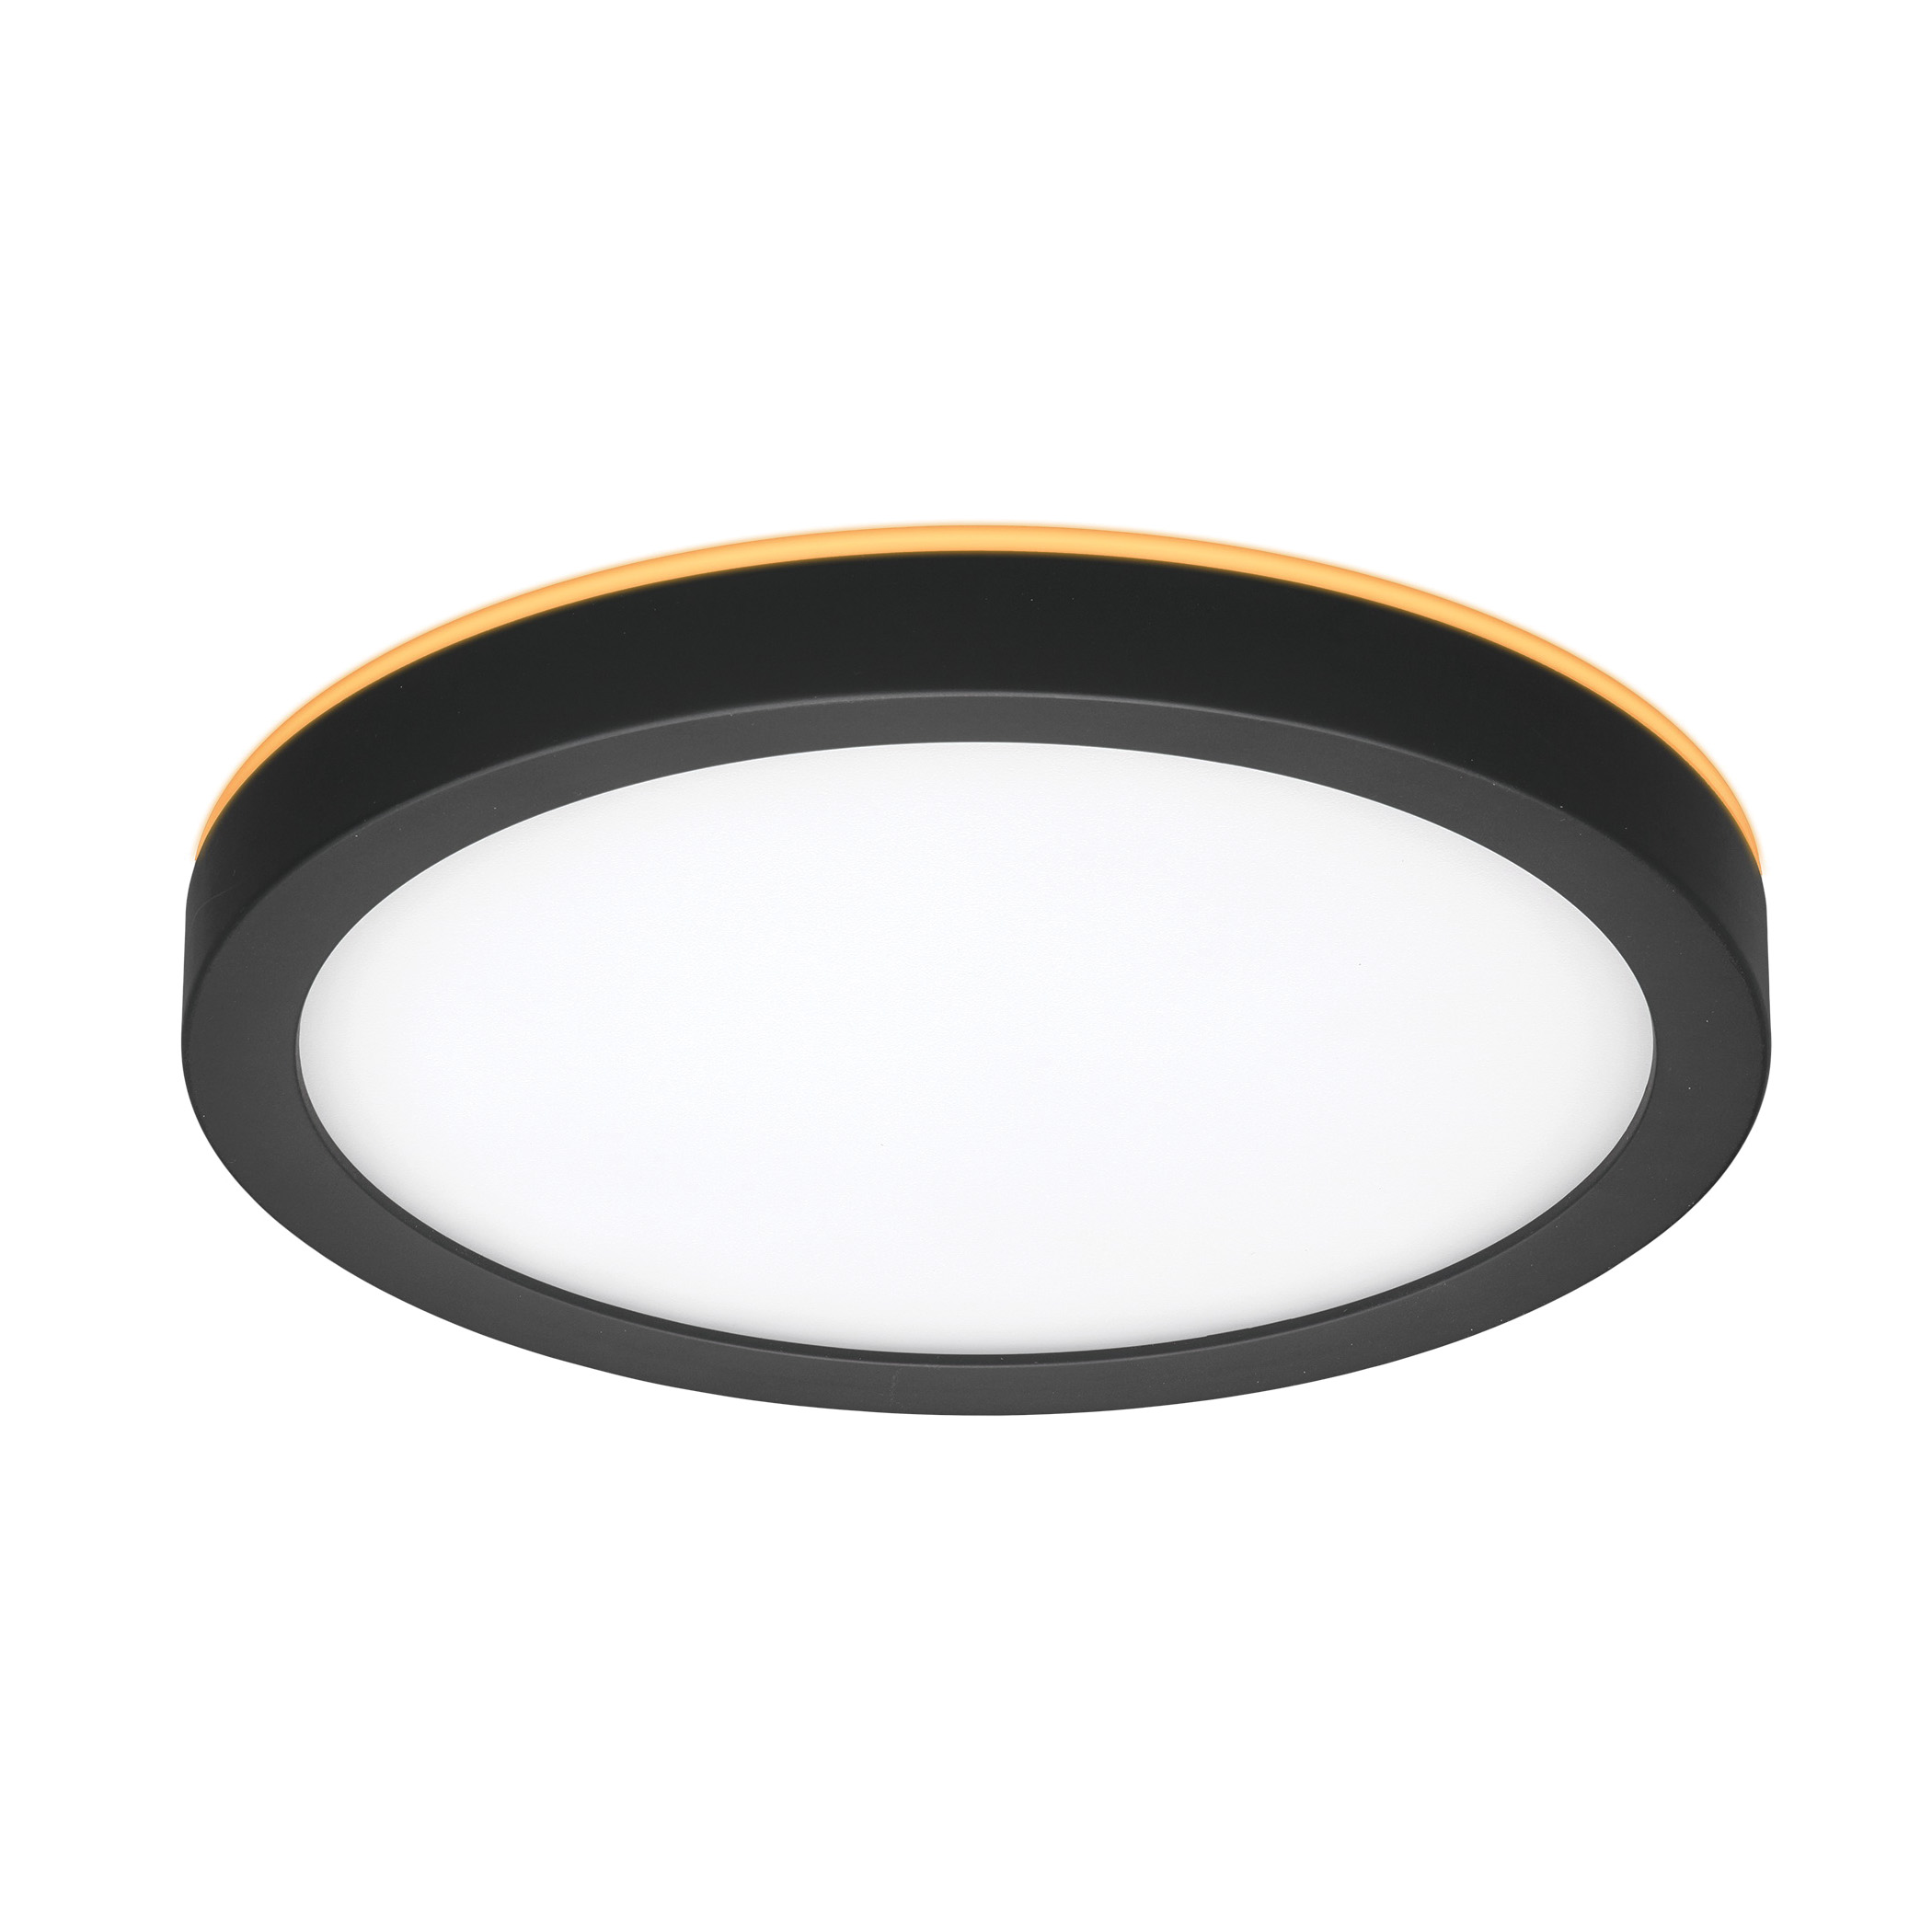 LowPro Series 56568115 Ceiling Light with Nightlight, 120 V, 12 W, Integrated LED Lamp, 800 Lumens, Black Fixture